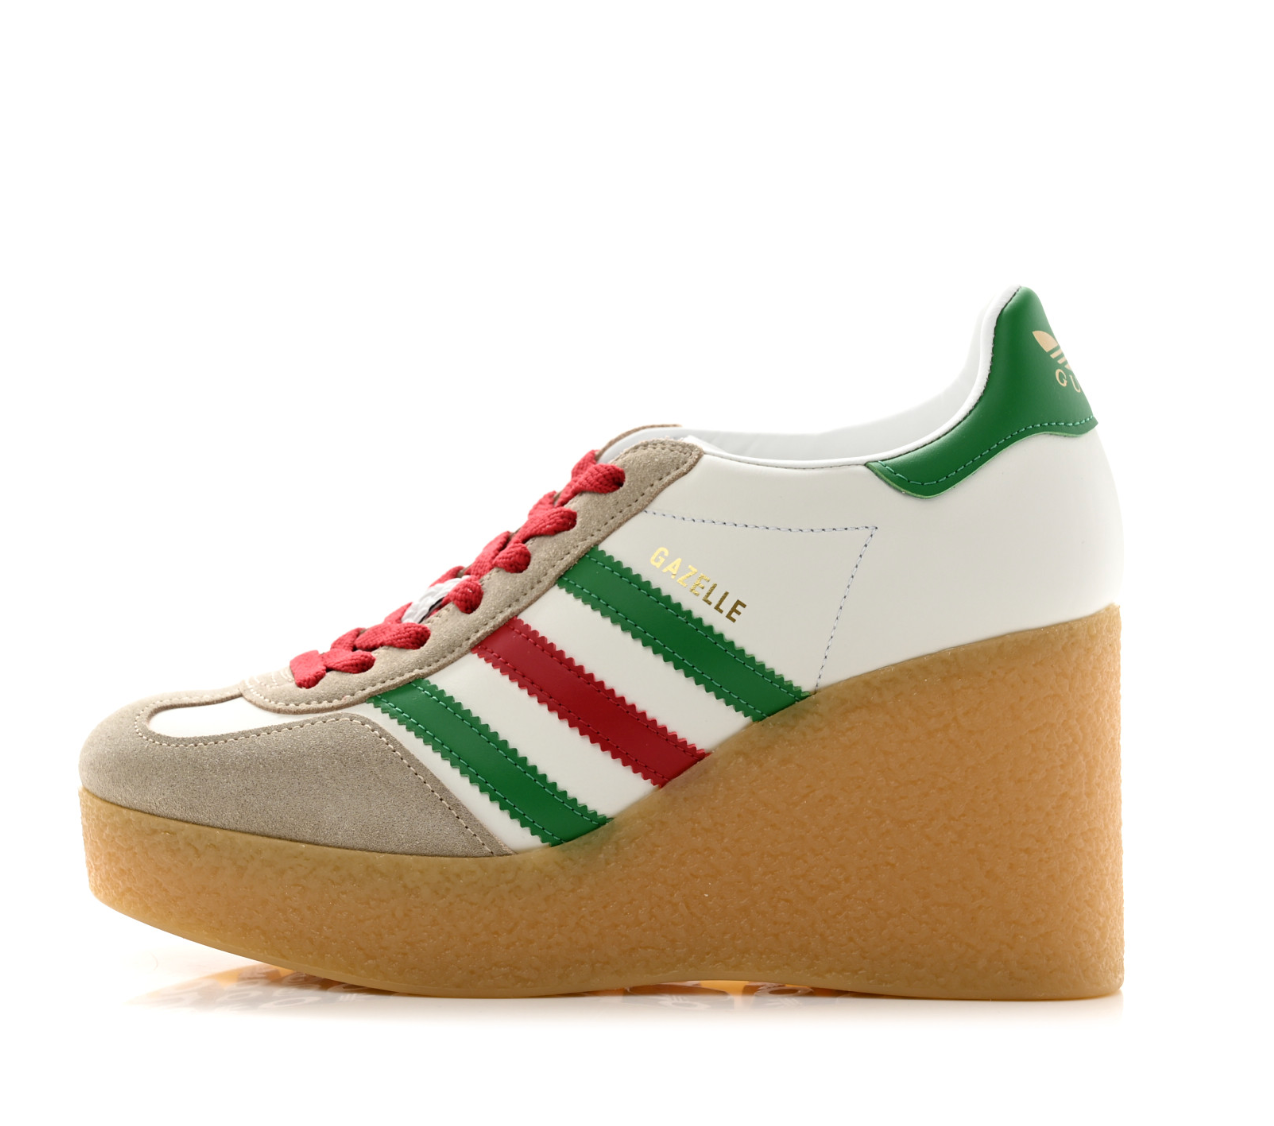 GUCCI X ADIDAS Suede Madeira Gazelle Wedge Sneakers 37.5 Oatmeal White New Shamarock Hibiscus Red (resale market - $850) 